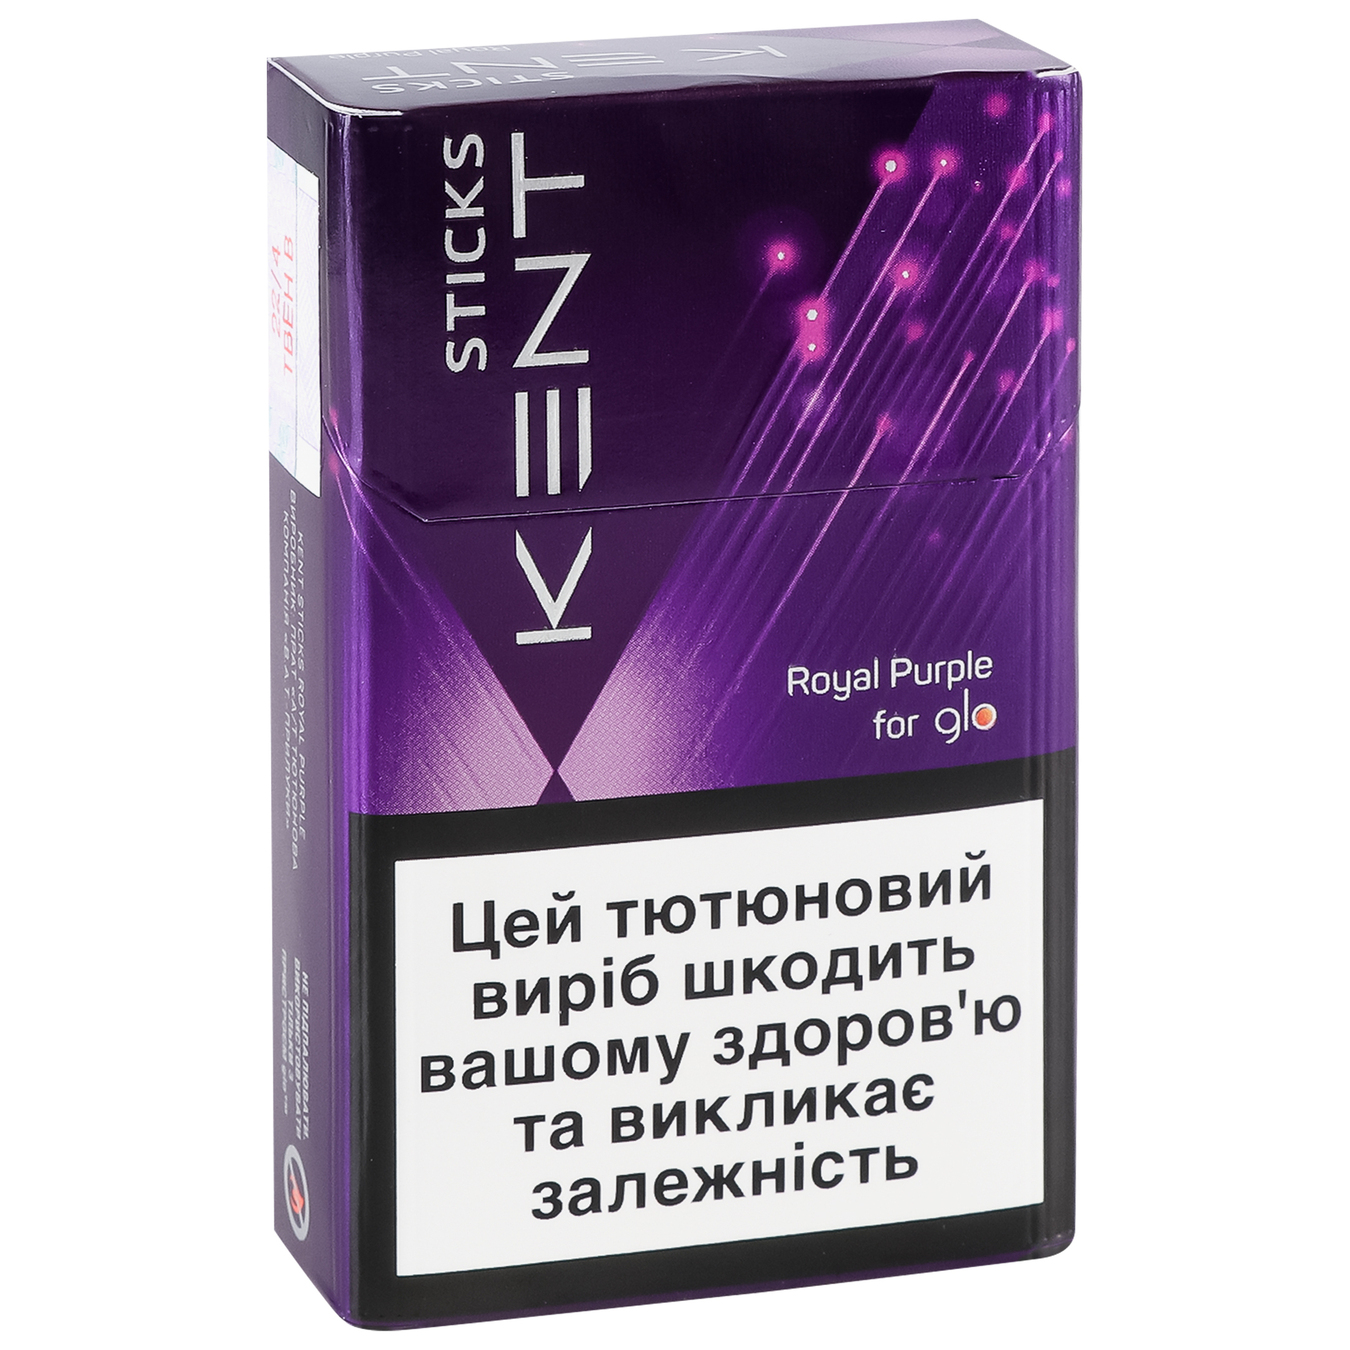 Sticks Kent Demi Royal Purple 20pcs (the price is indicated without excise tax) 4